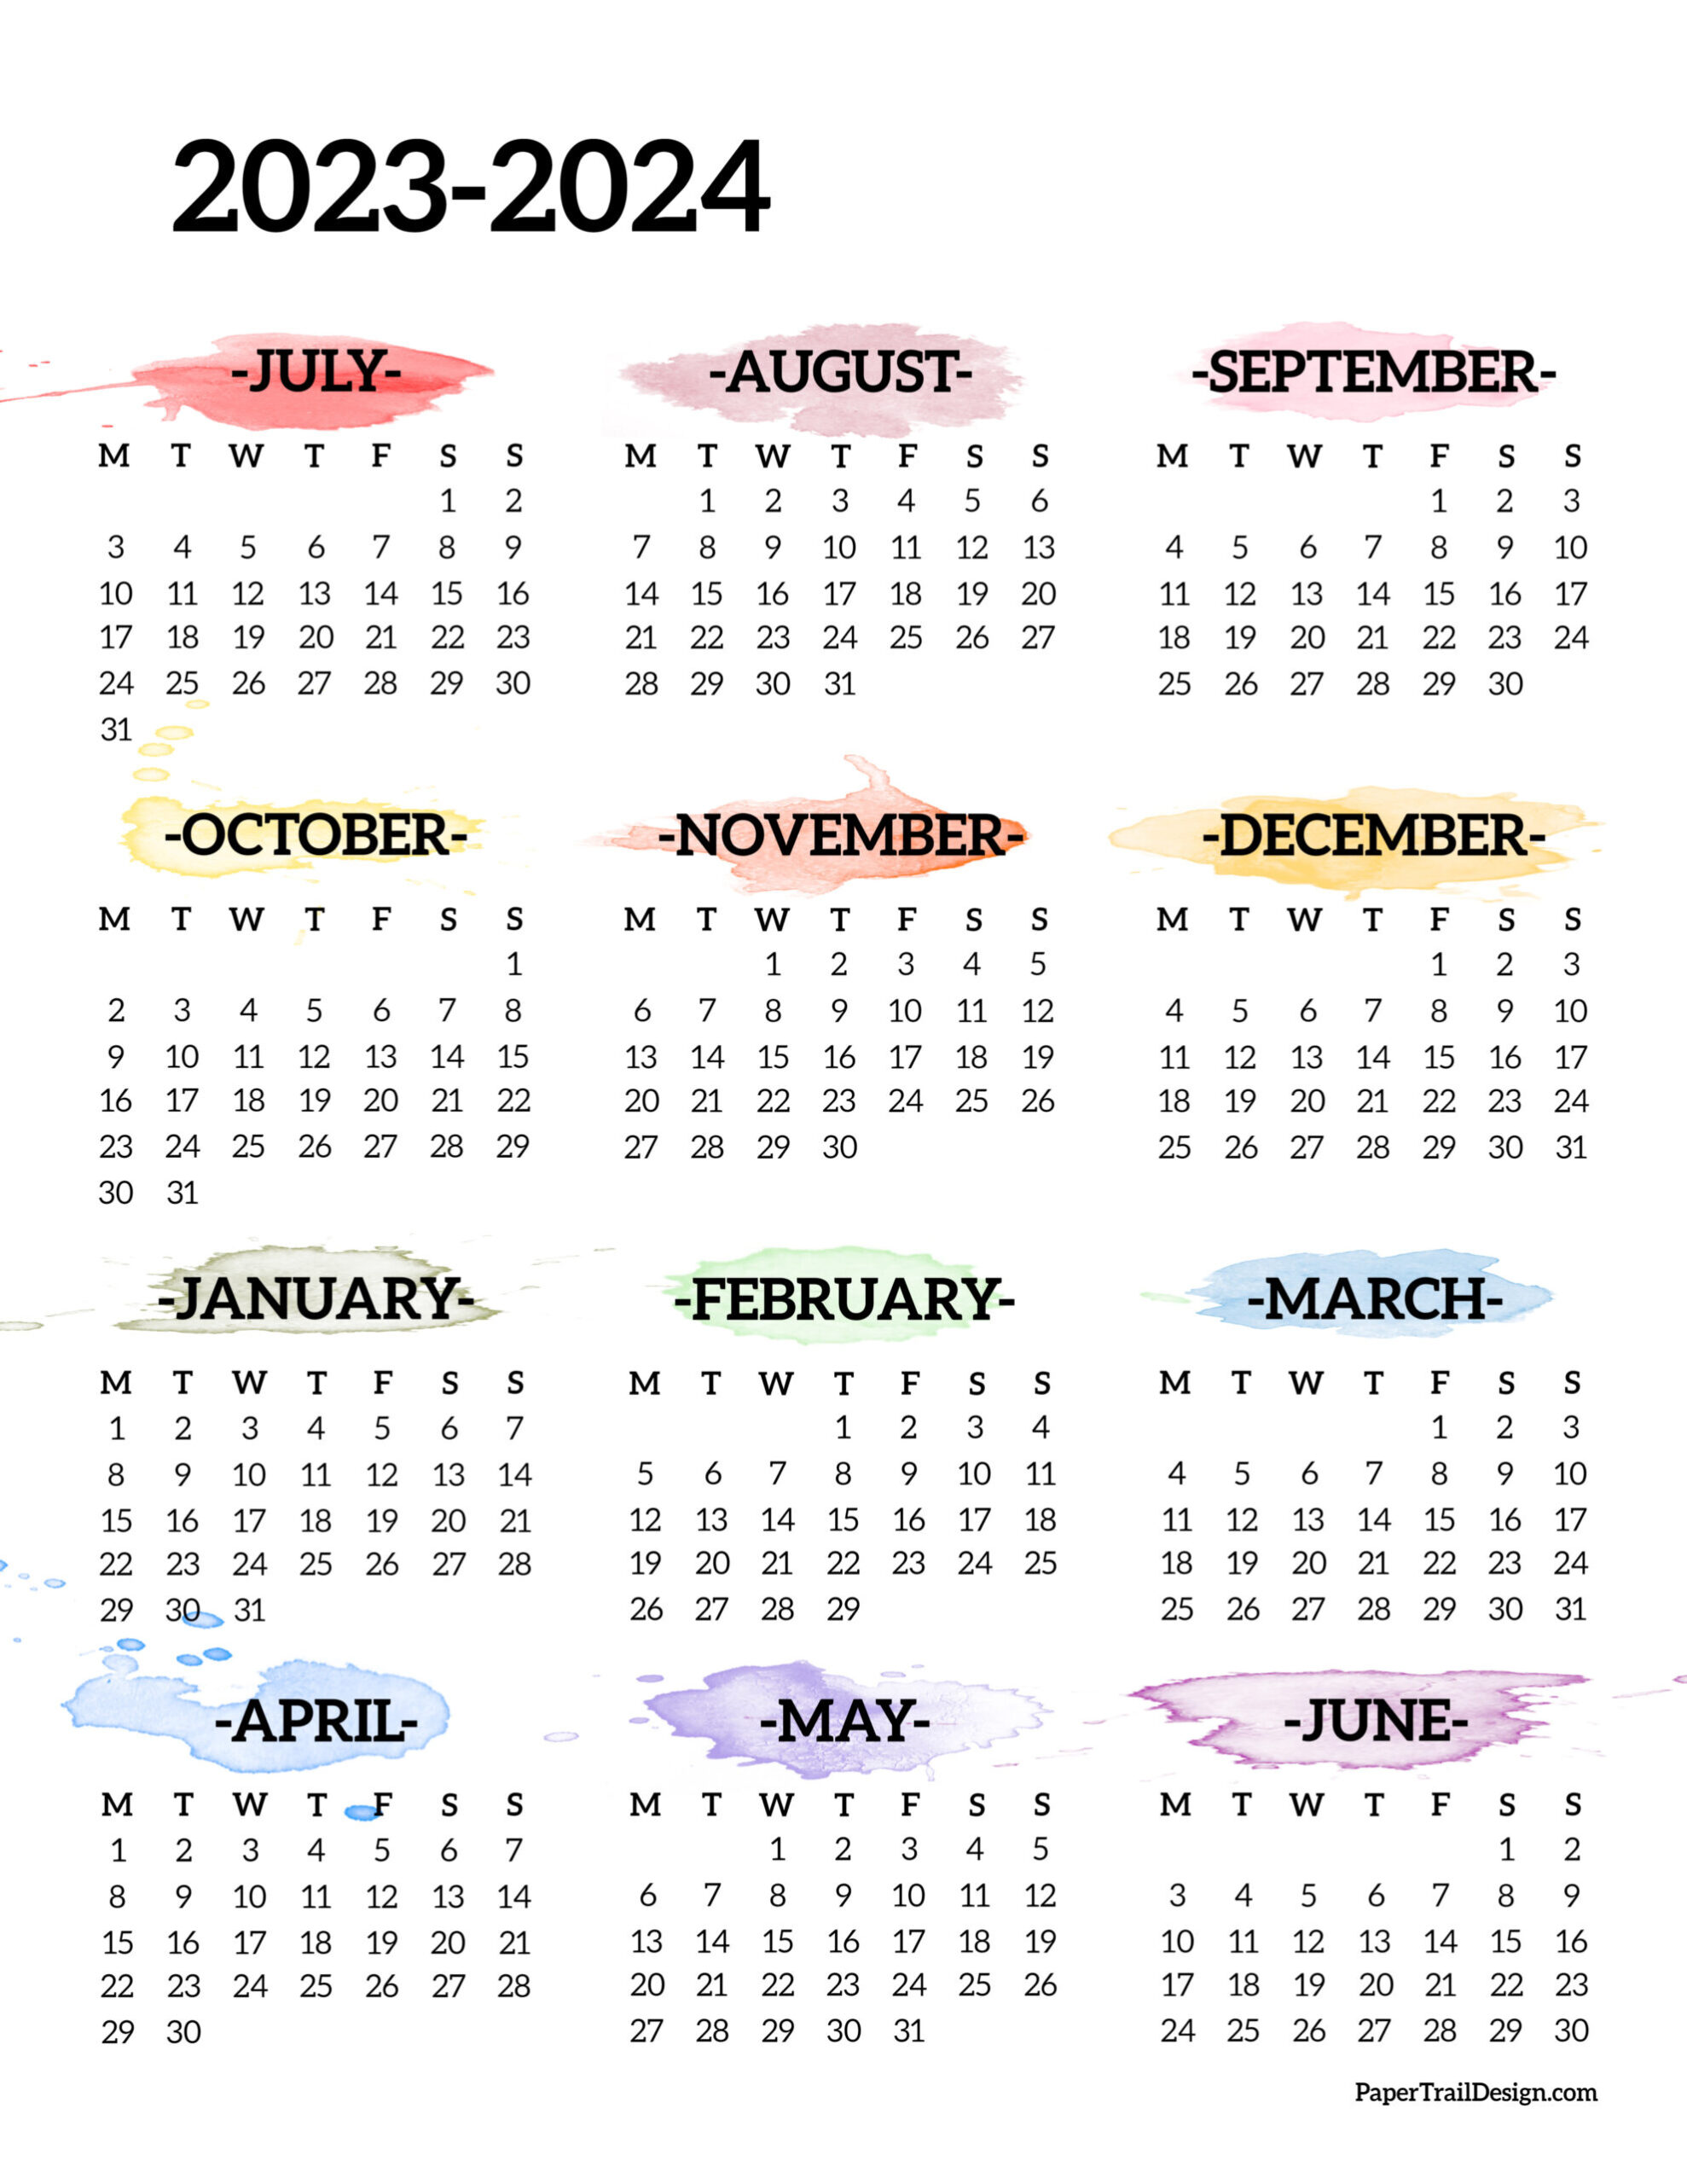 2023-2024 School Year Calendar Free Printable - Paper Trail Design within August 2023 To July 2024 Calendar Printable